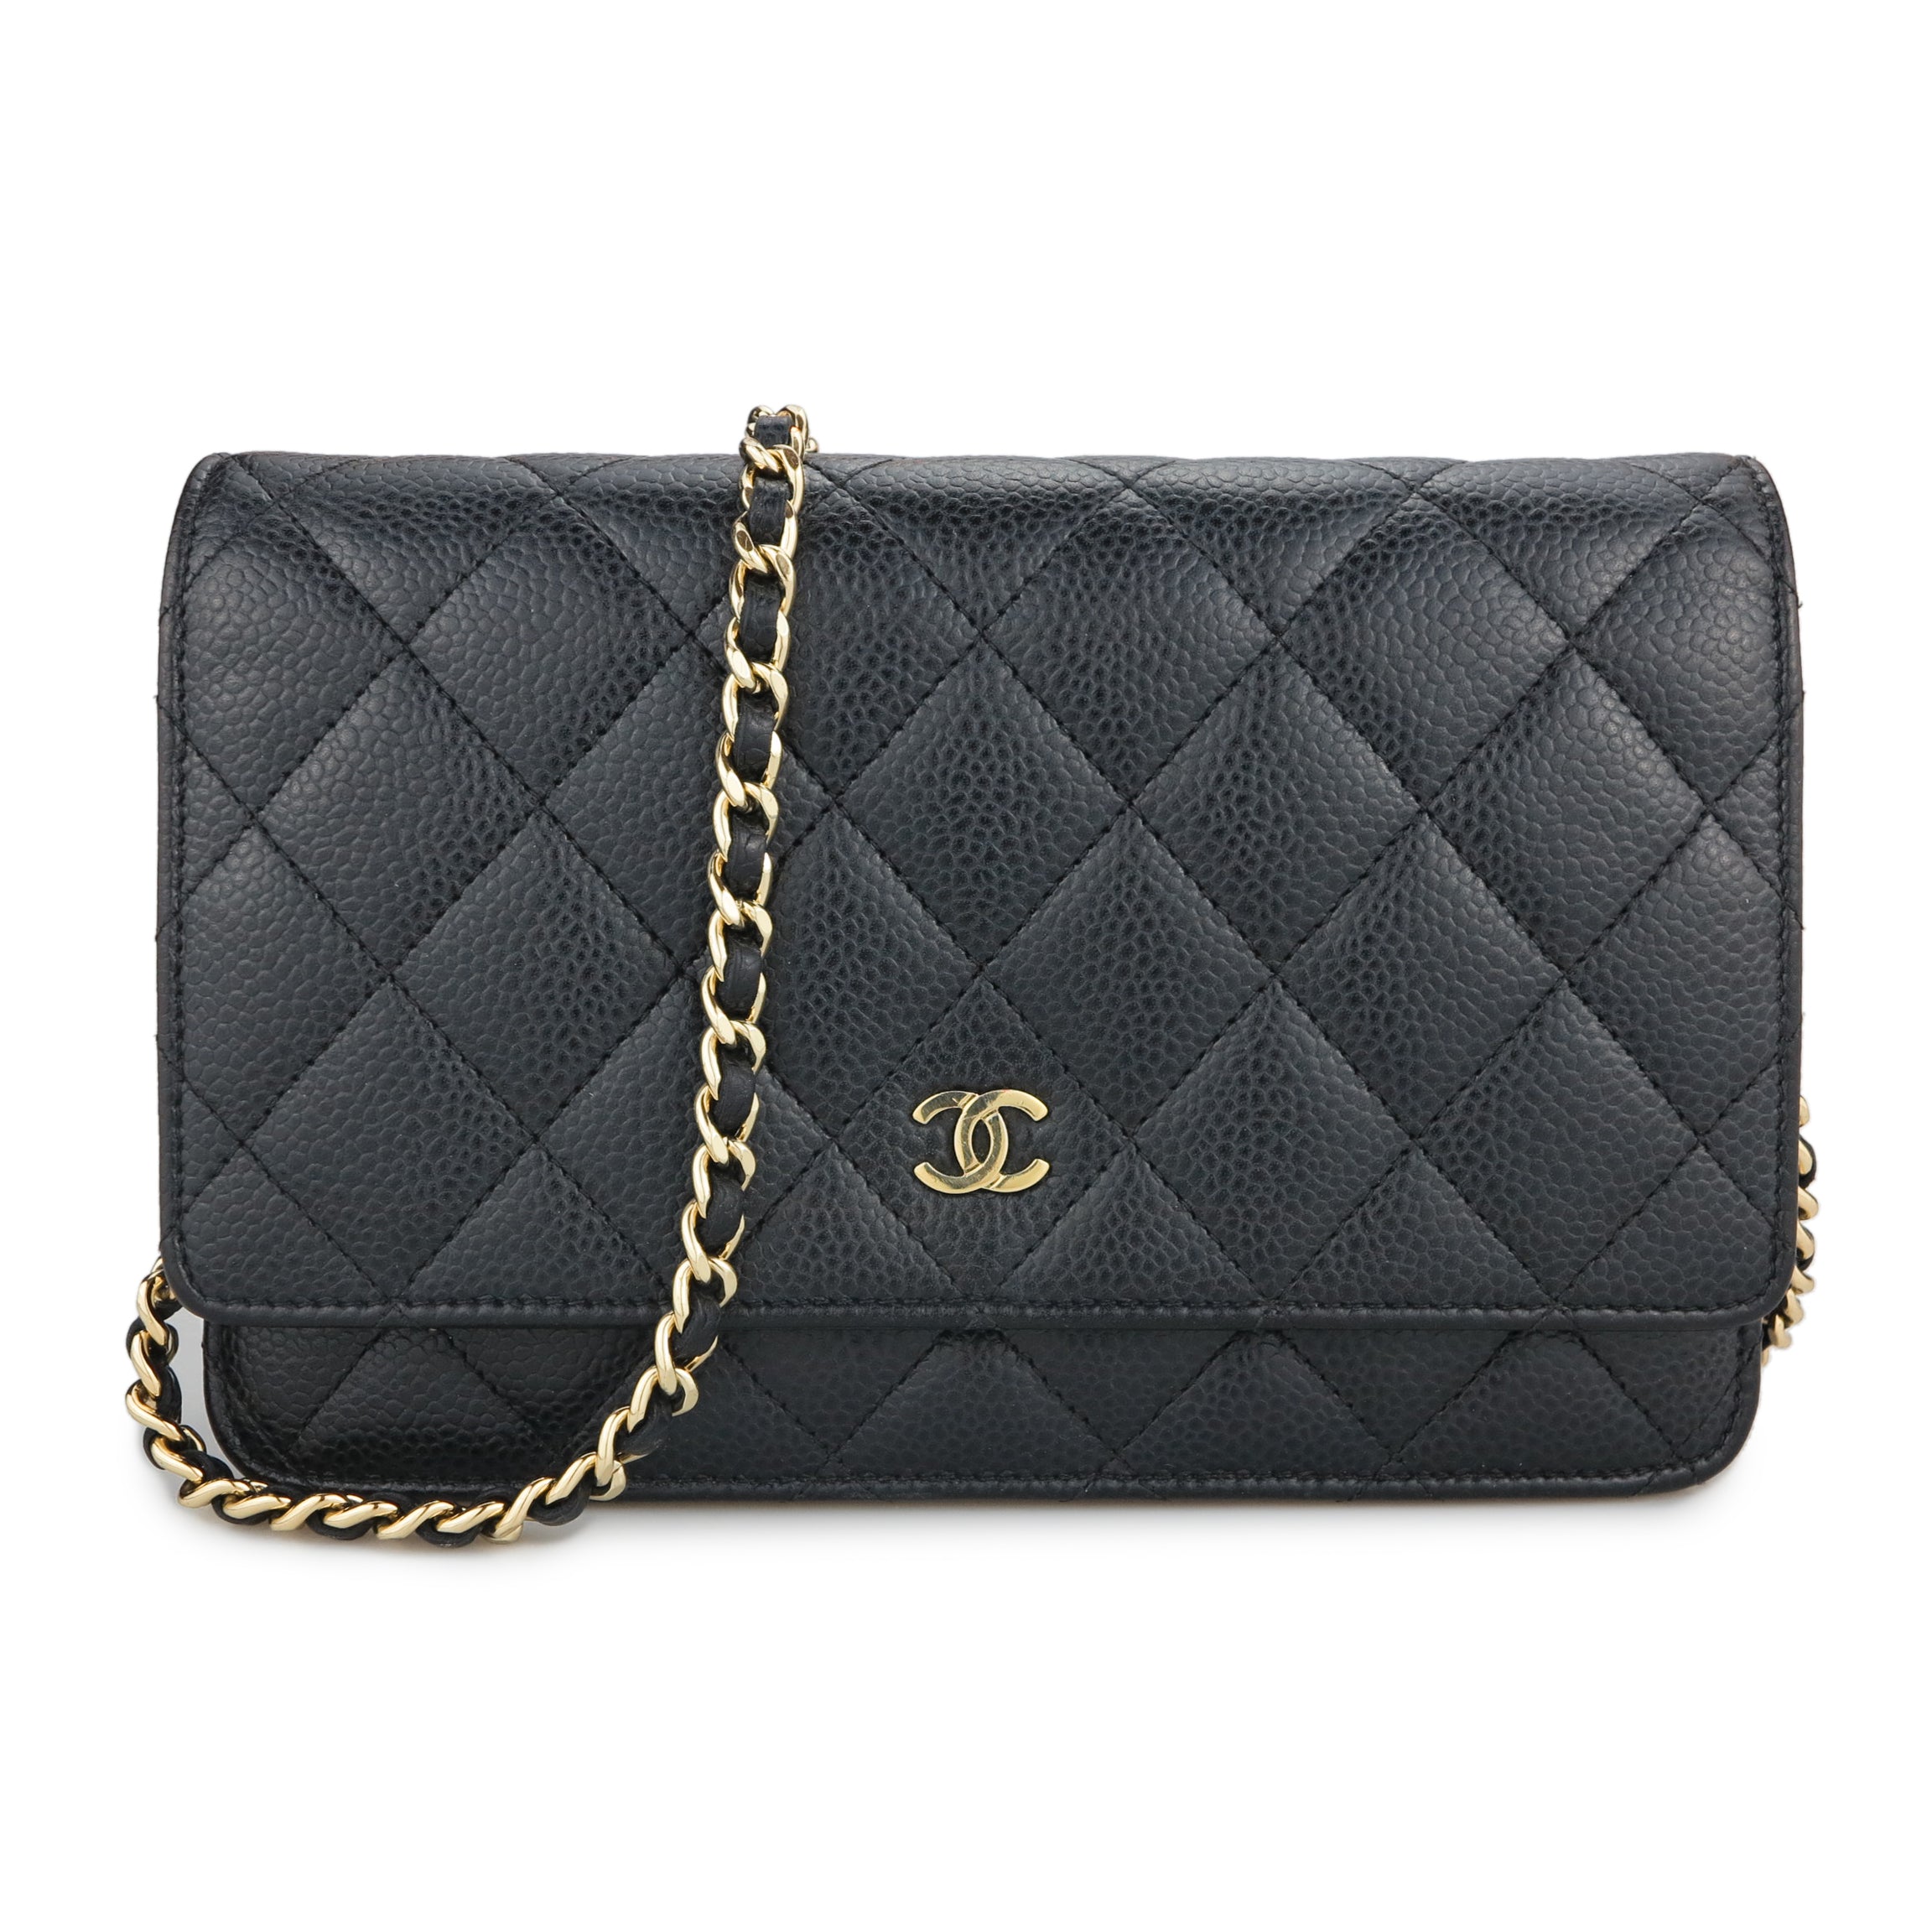 Chanel Bag With Pearls - 61 For Sale on 1stDibs